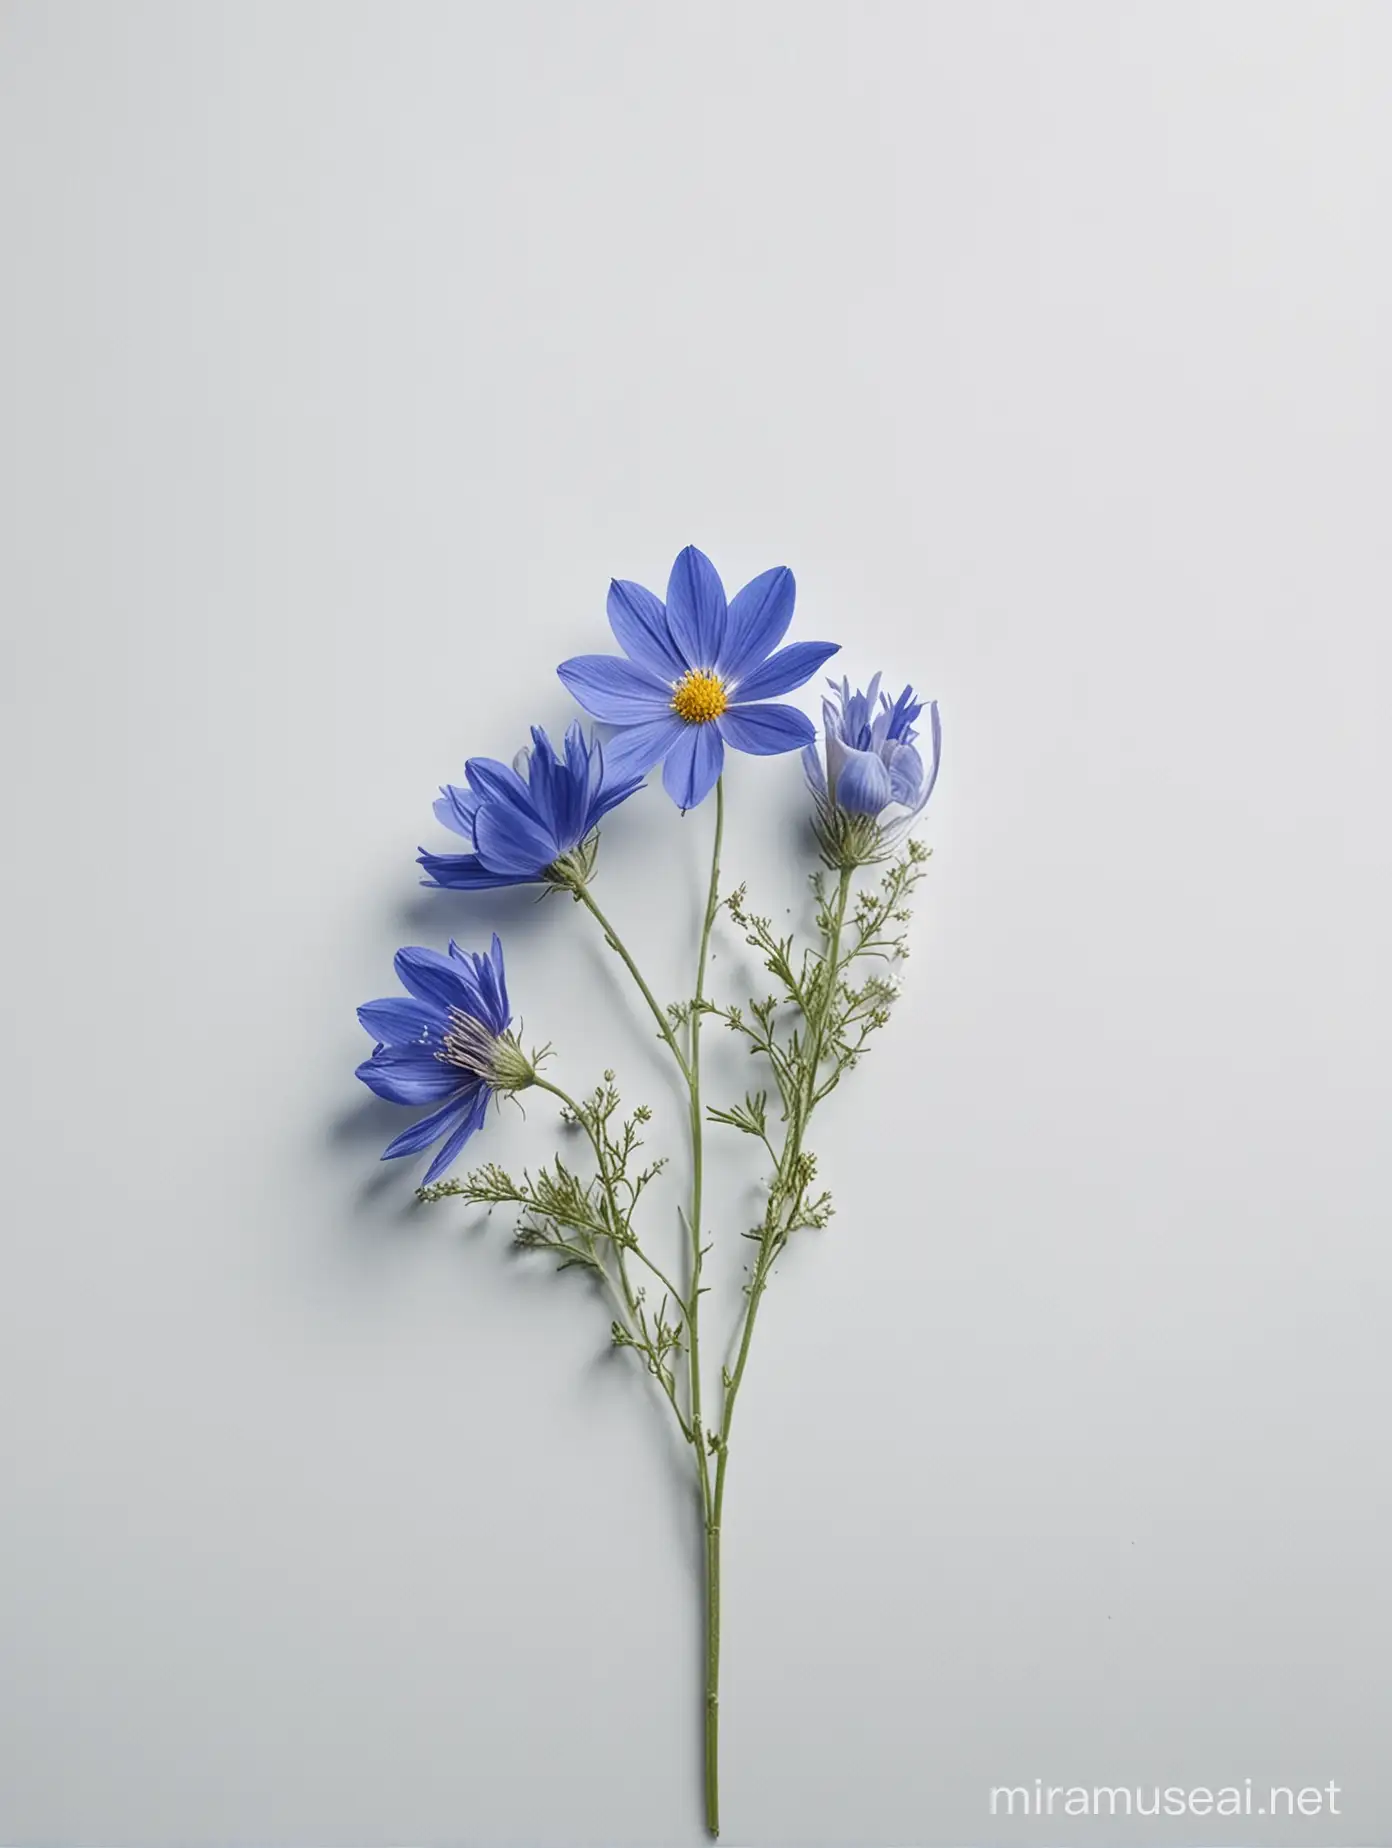 Beautiful Wildflowers on Blue and White Background